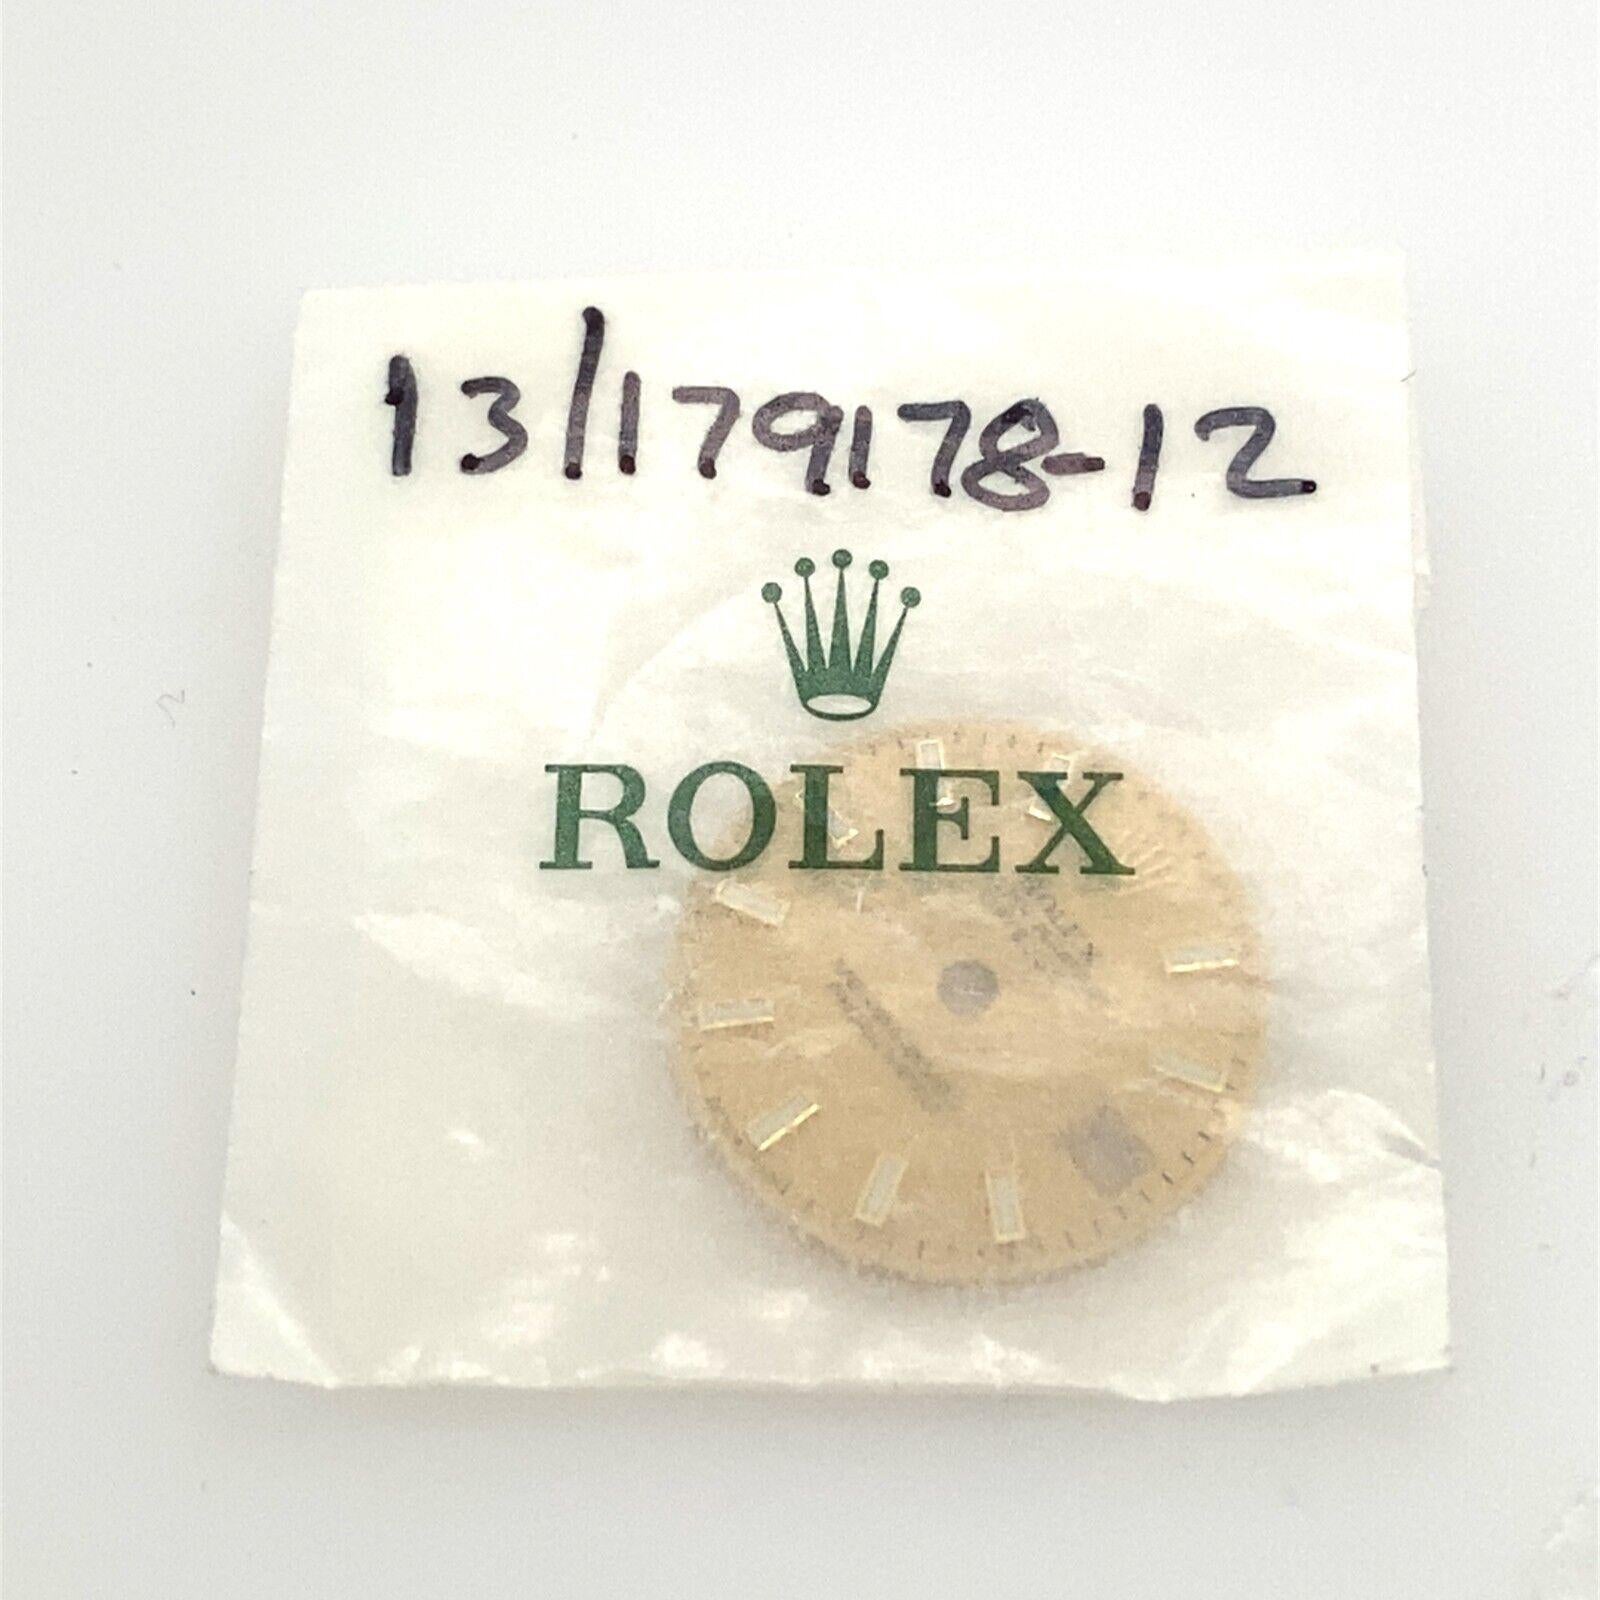 Rolex Watch Dial Oyster Perpetual Date Just 13/179178-12. 
With white batons.

Additional Information: 
Serial Number: 13/179178-12
Excellent Condition
SMS6581